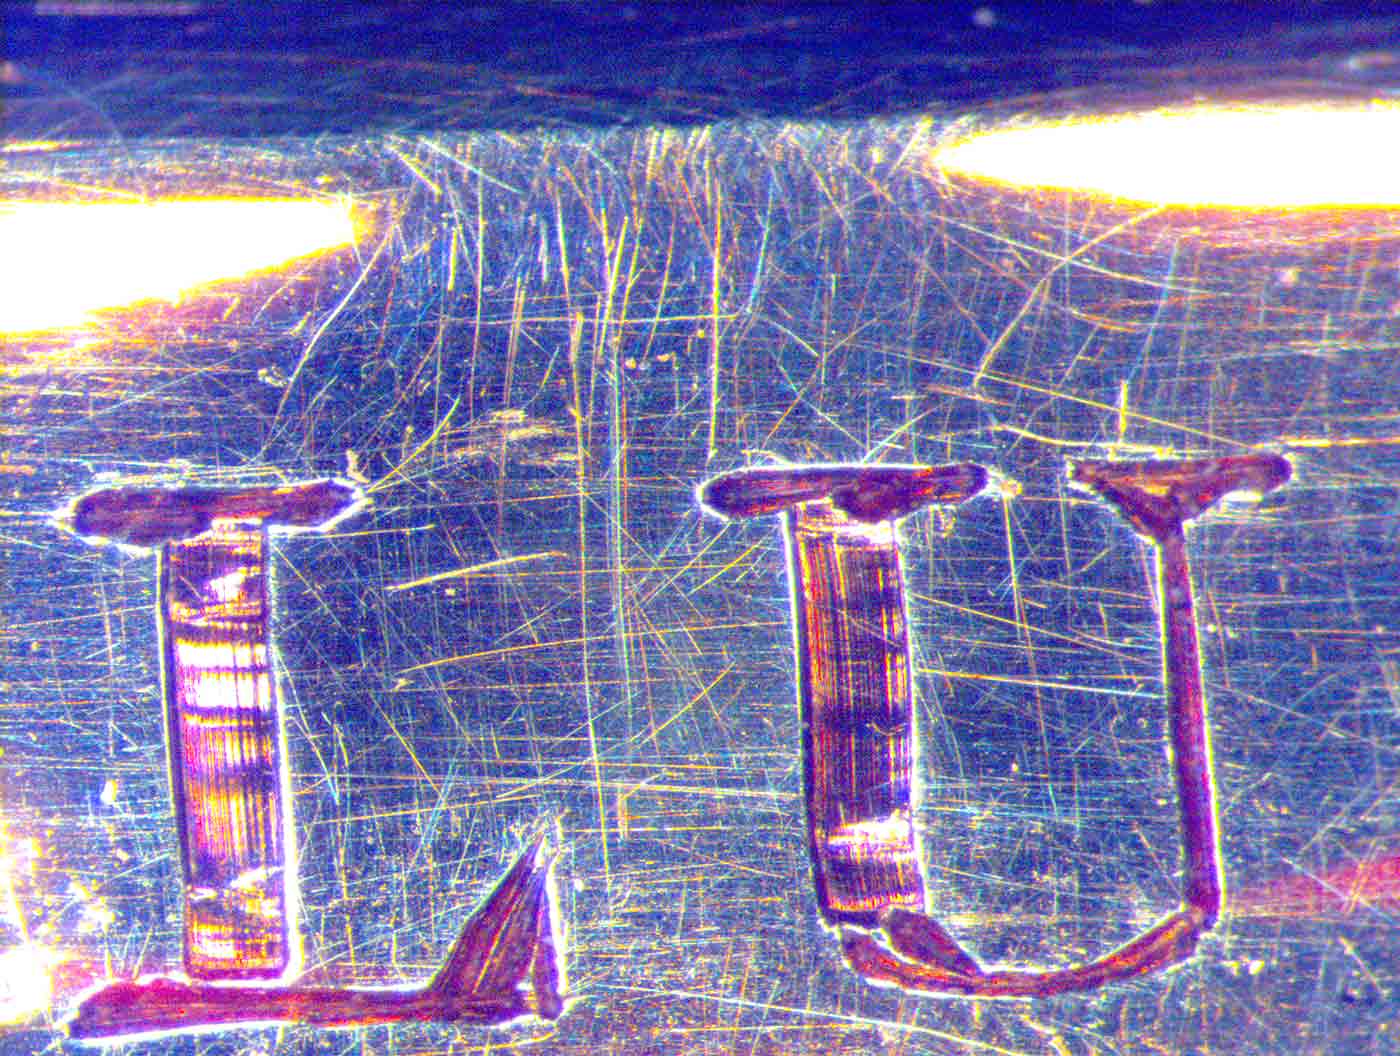 Image of magnification of a coin showing the letters 'LU' on a scratched surface. - click to view larger image